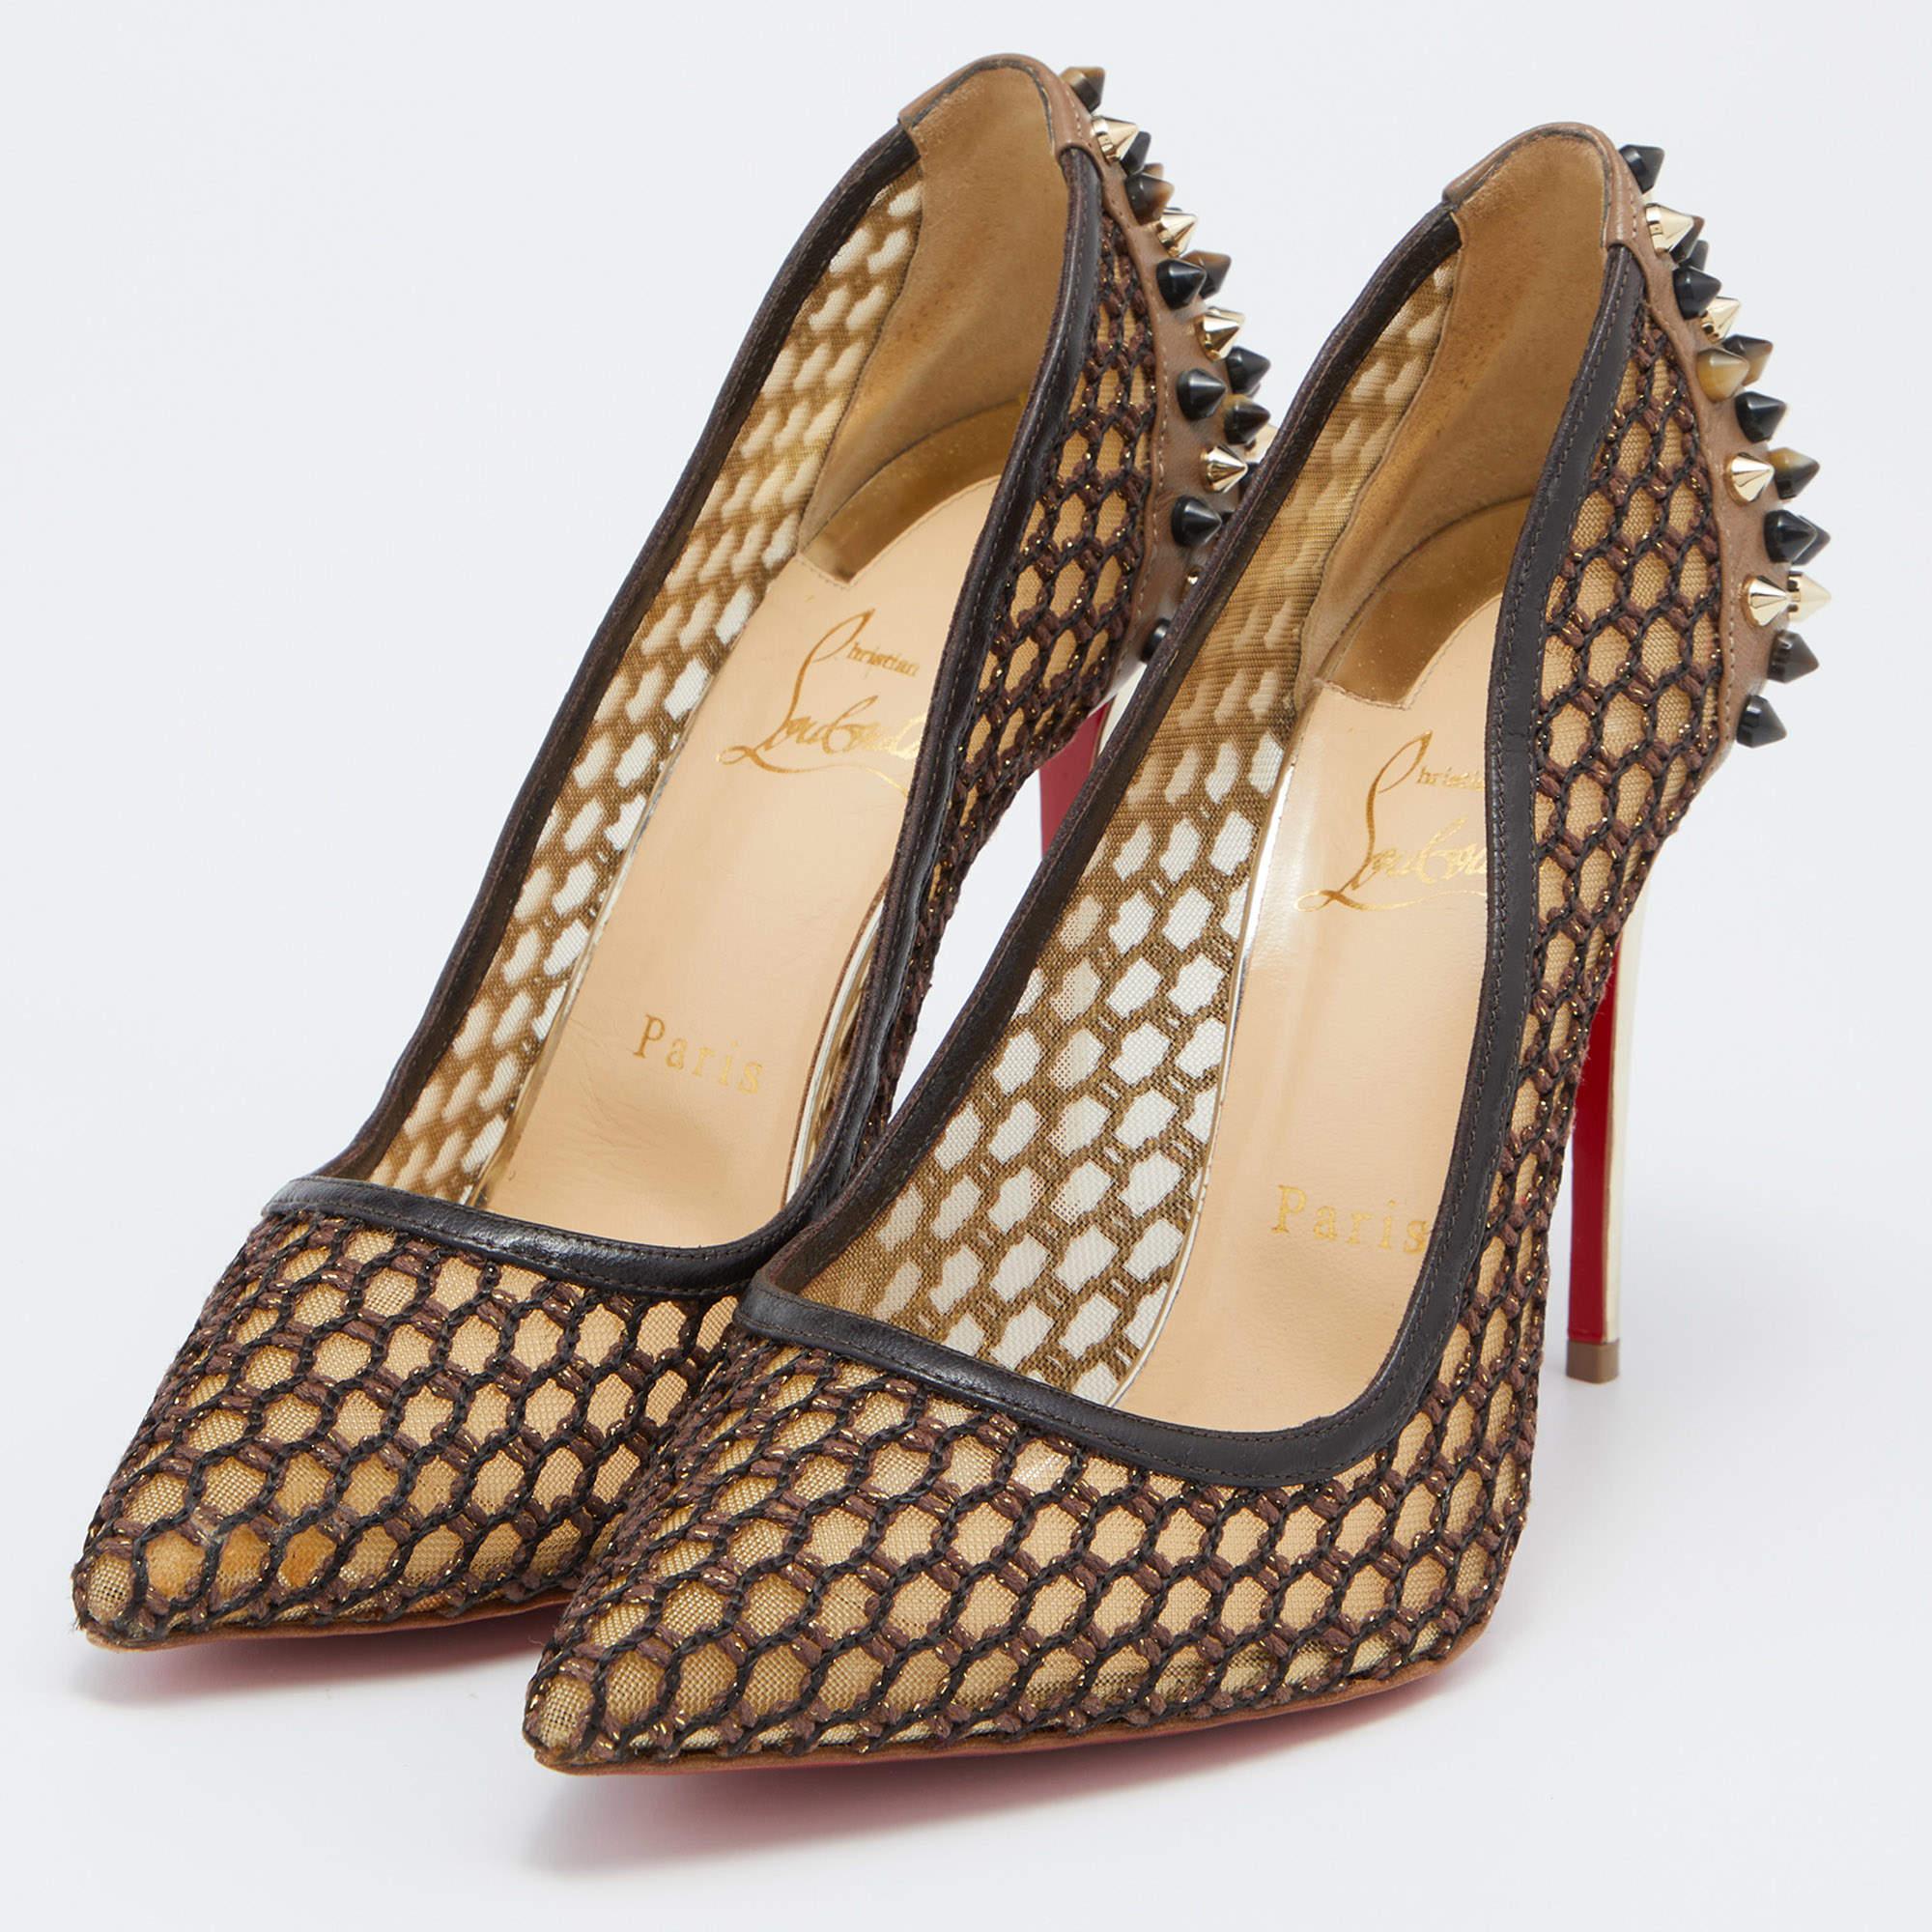 Women's Christian Louboutin Brown/Black Leather and Mesh Pointed Toe Pumps Size 38.5